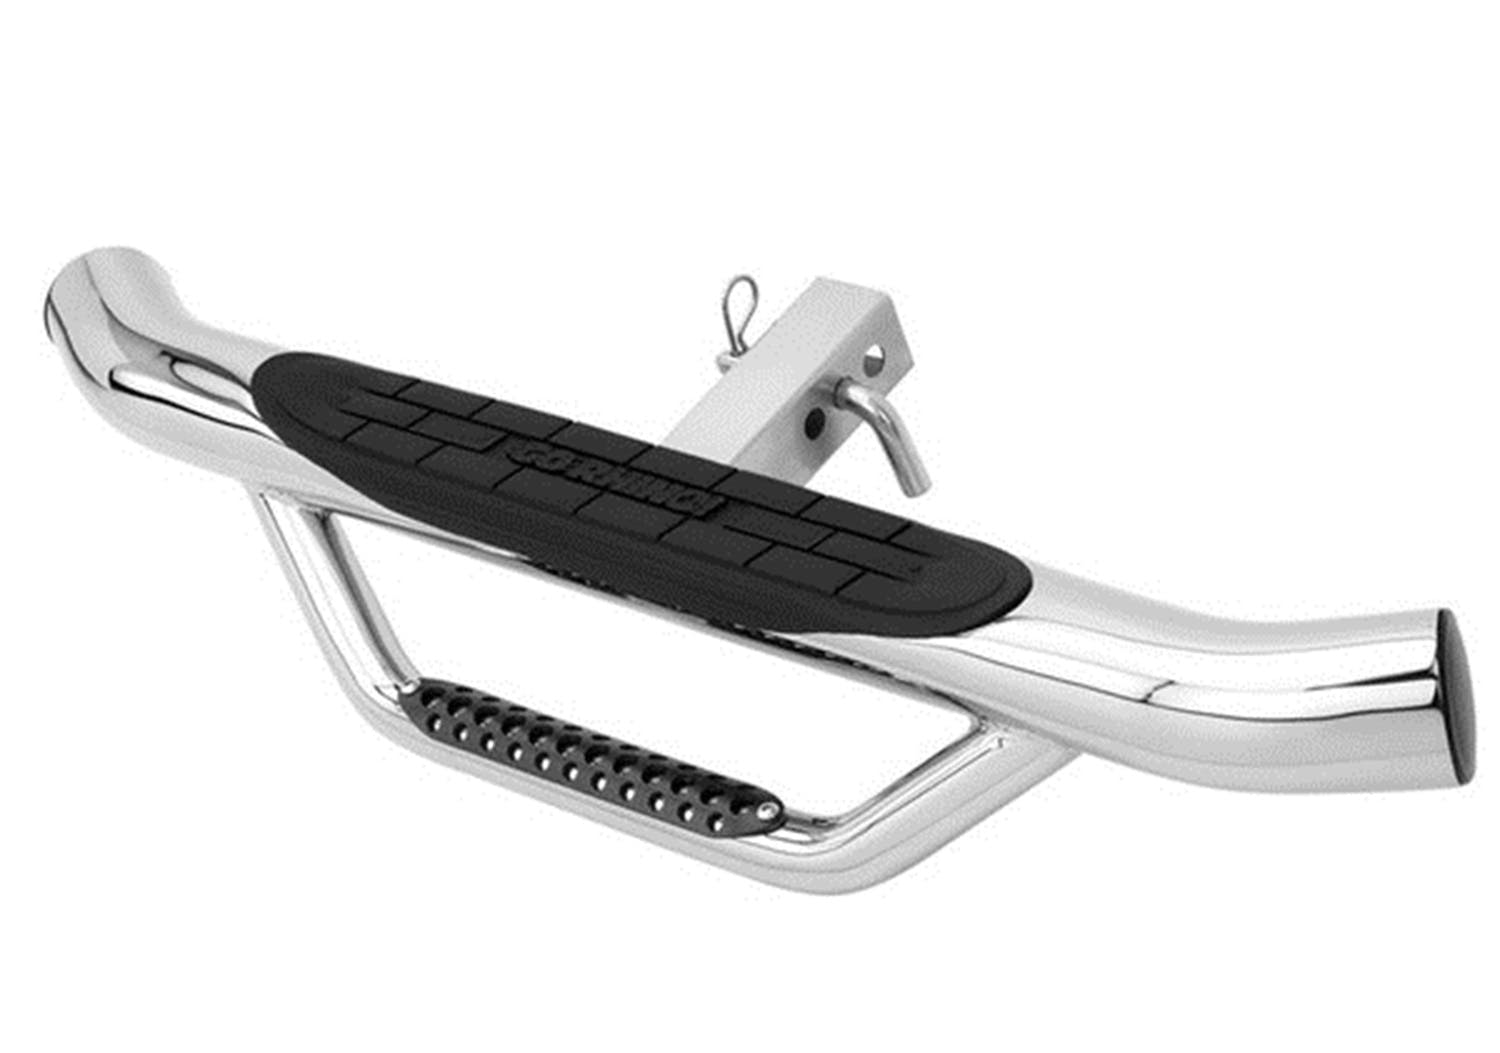 Go Rhino D360PS Dominator Hitch Step - Stainless